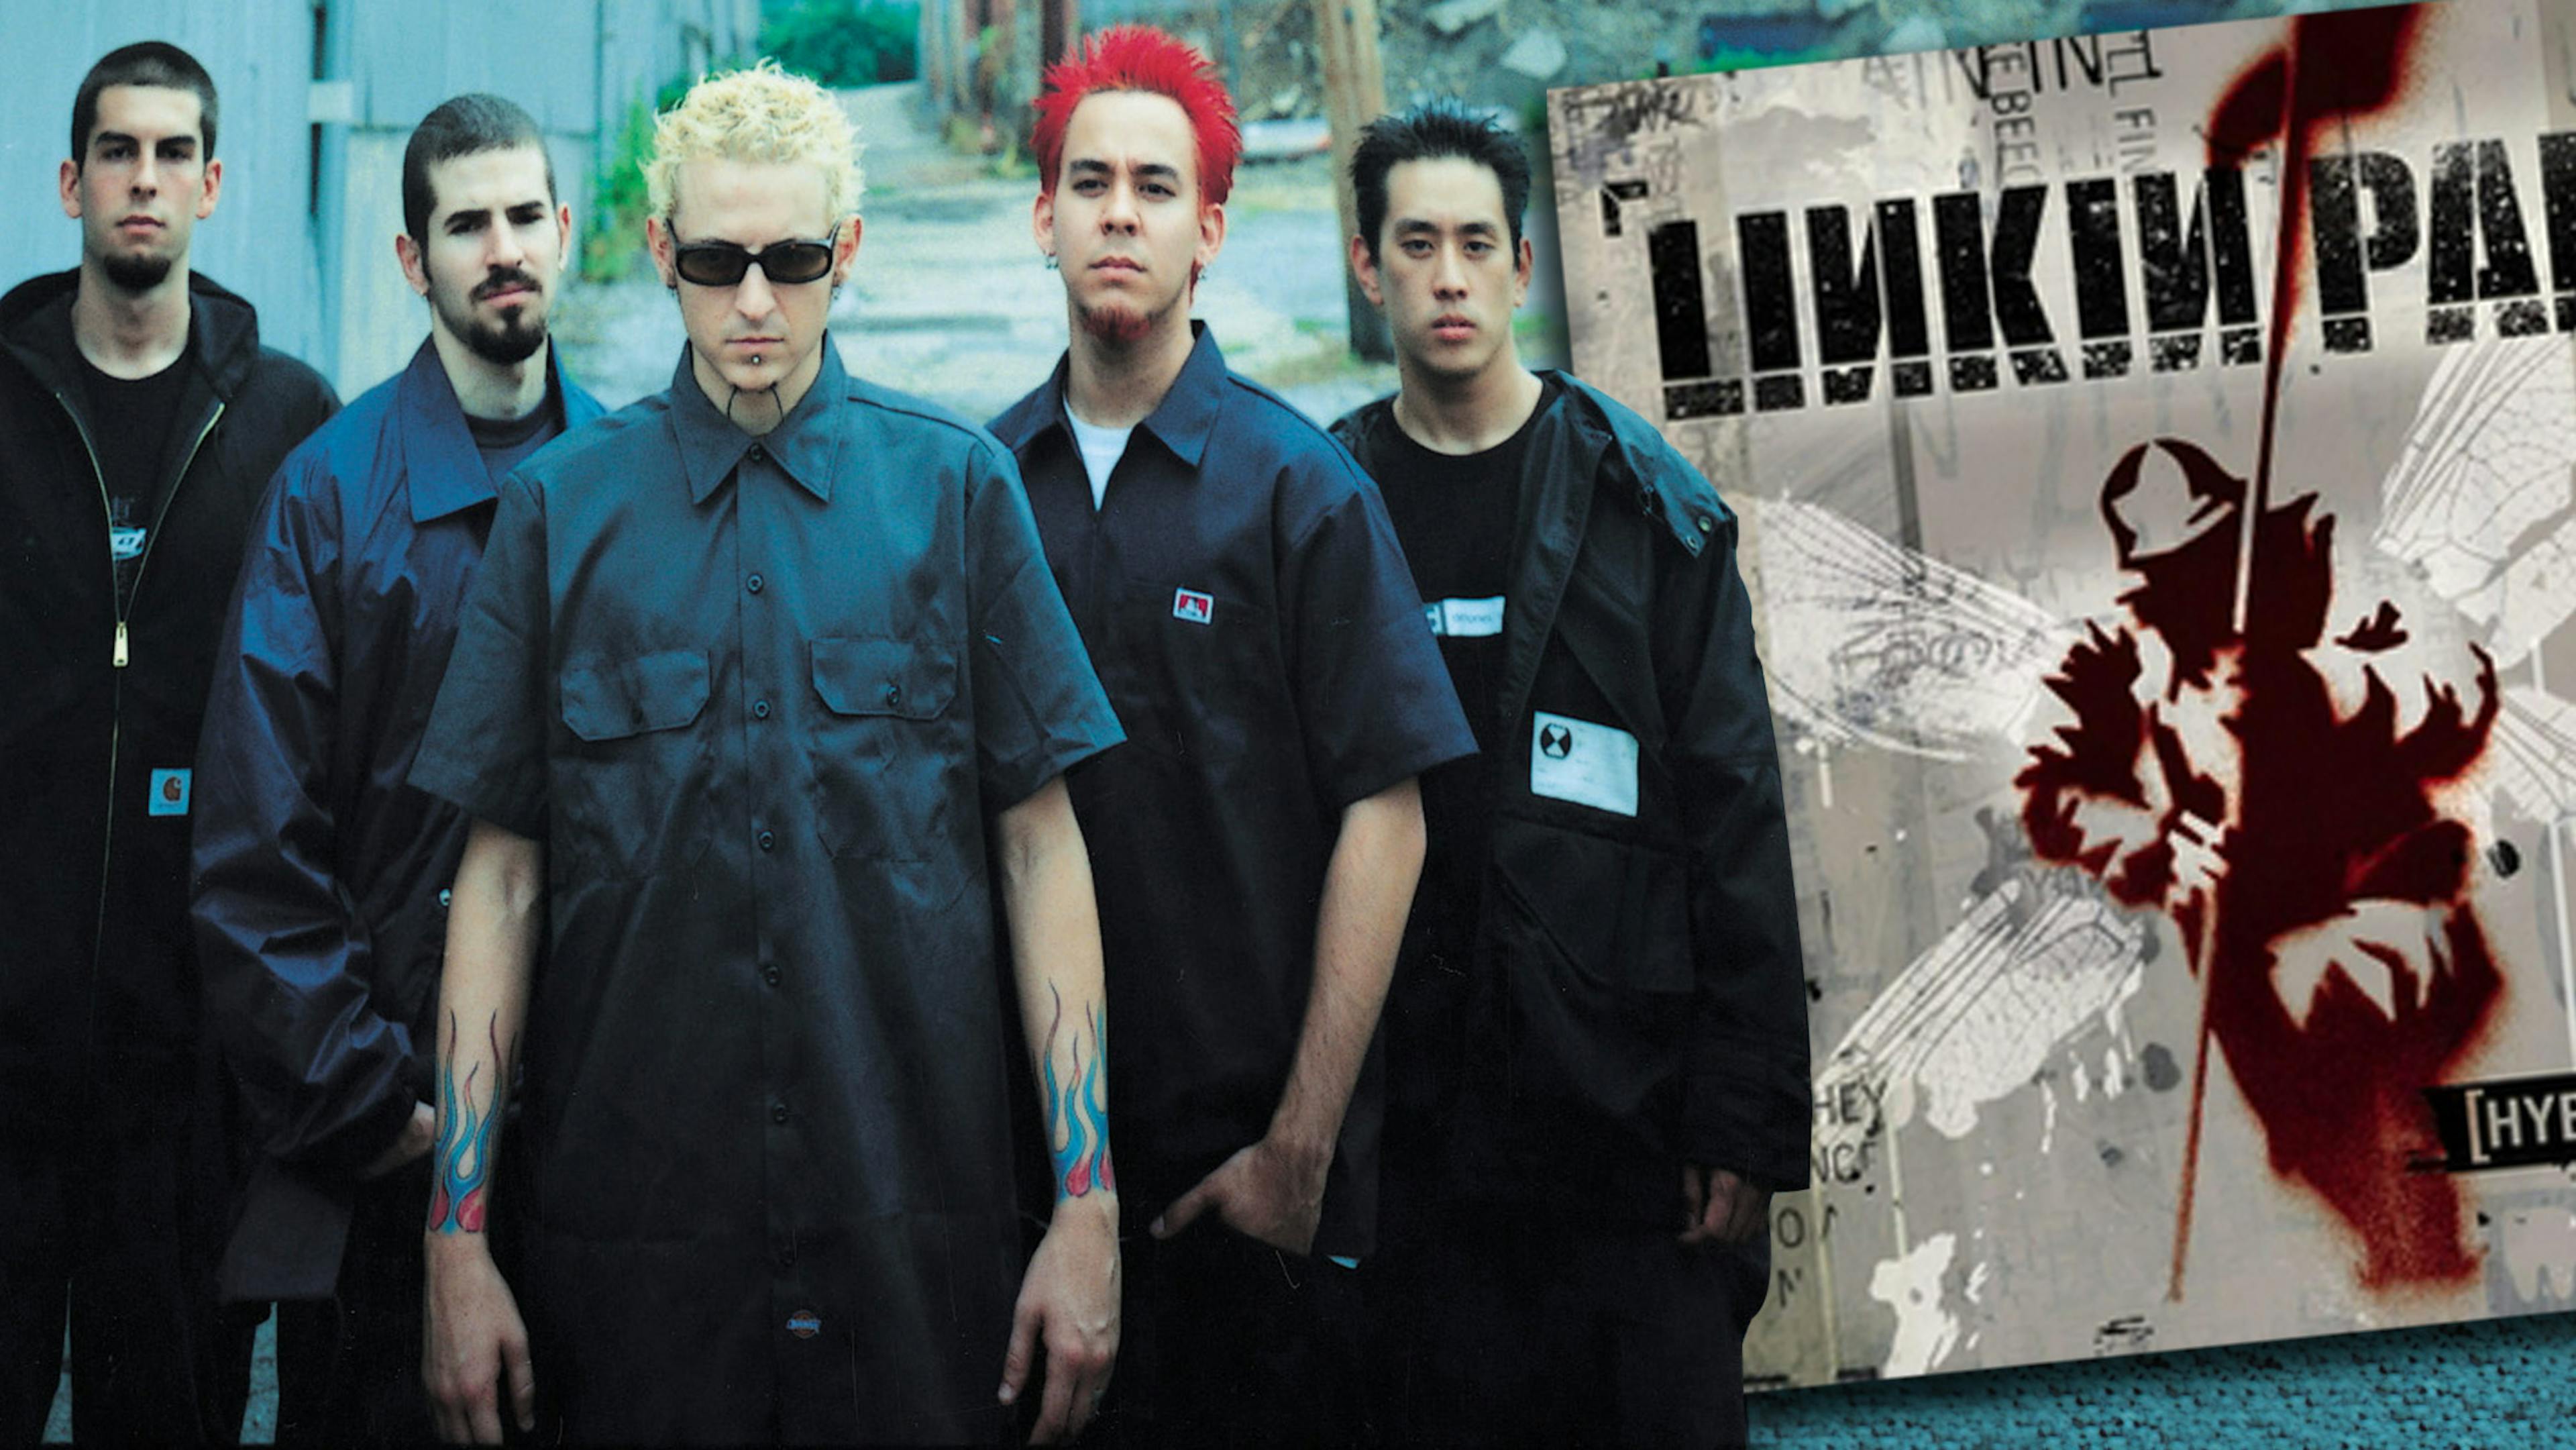 Every song on Linkin Park’s Hybrid Theory ranked from worst to best